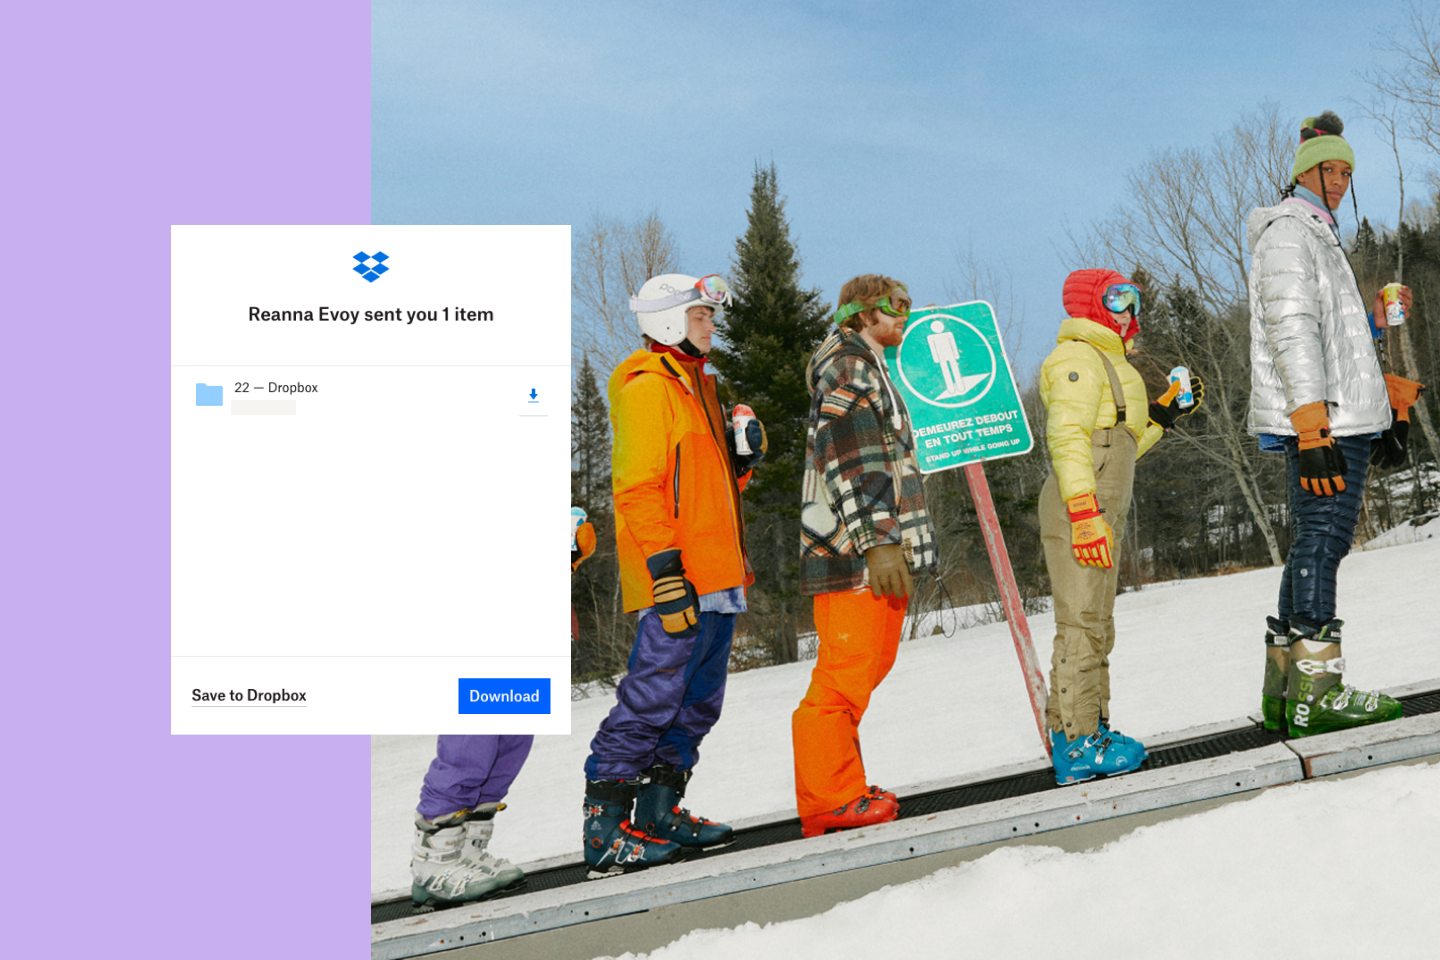 Dropbox Transfer window; people wear ski boots and colorful outerwear in the snow